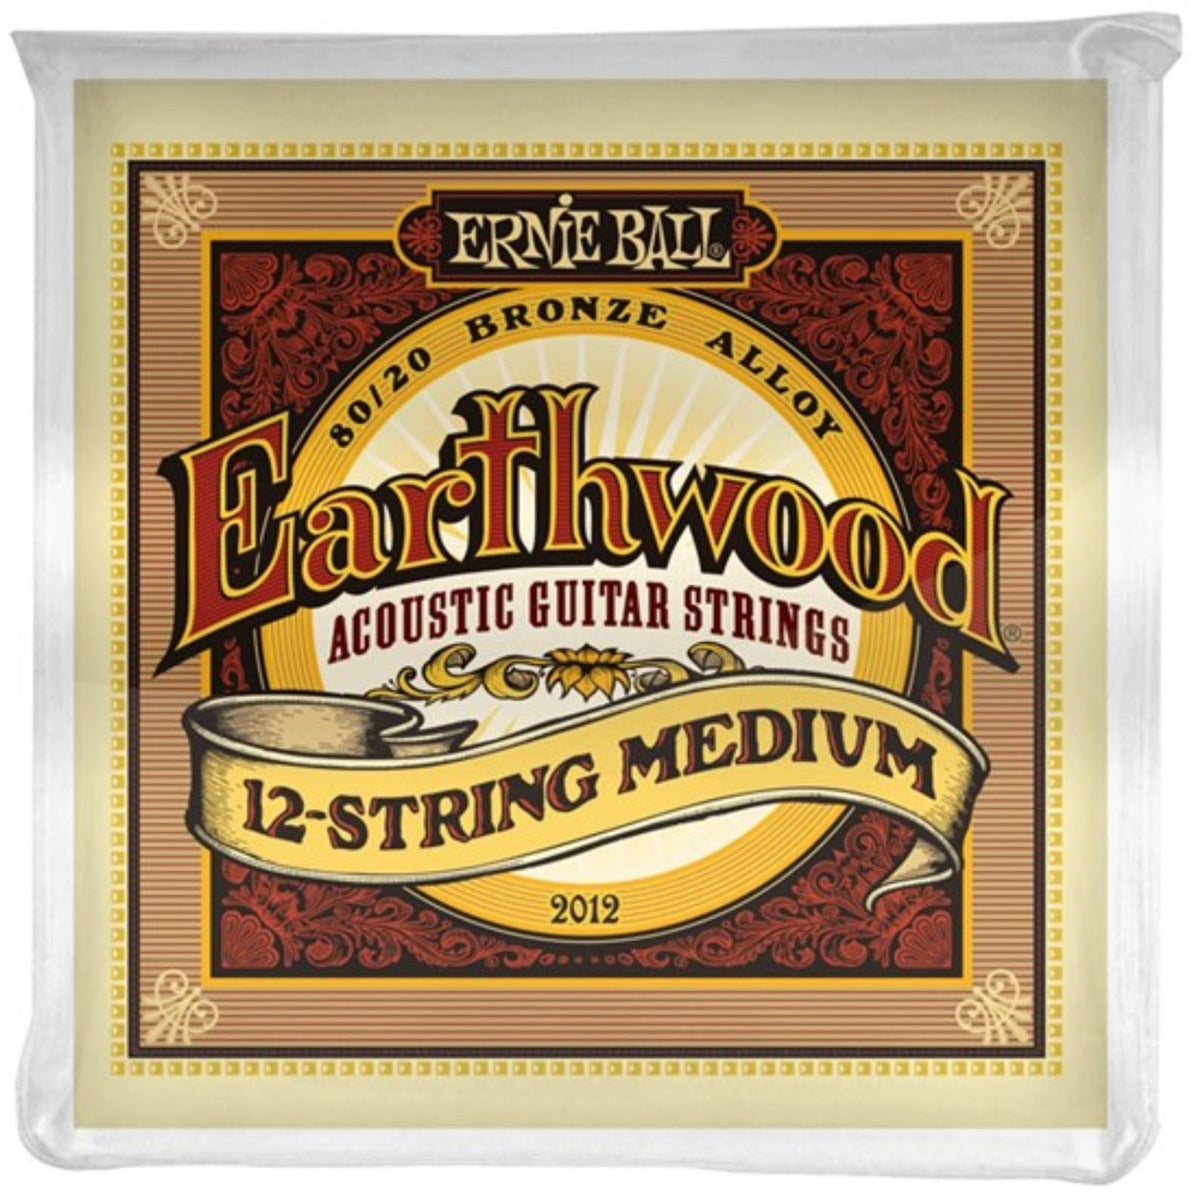 The Ernie Ball Earthwood Acoustic Guitar Strings are made from 80% copper, 20% zinc wire wrapped around hex shaped tin plated steel core wire. The most popular acoustic guitar strings provide a crisp, ringing sound with pleasing overtones. 